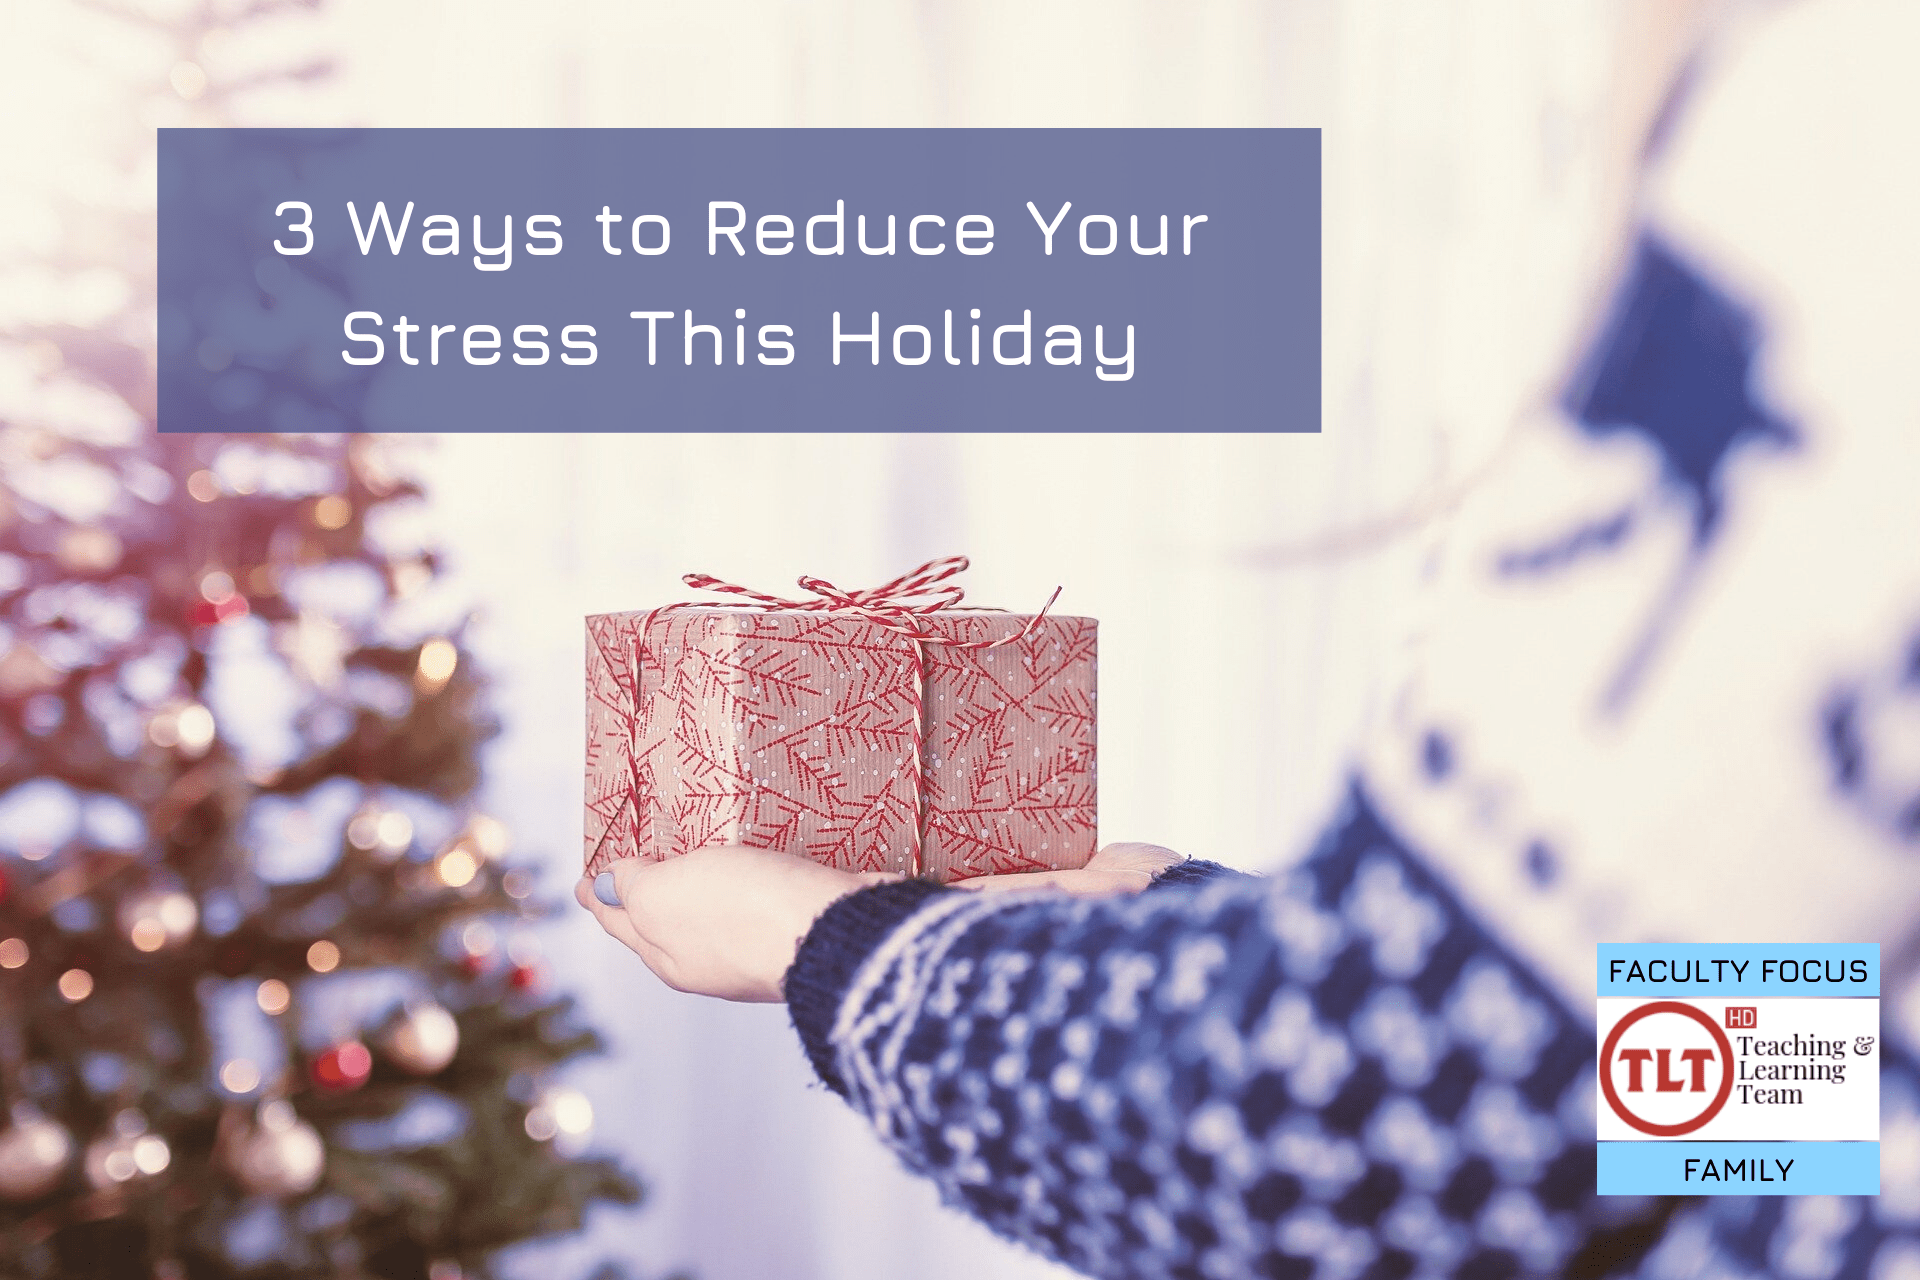 Image of person holding a wrapped gift with the text 3 Ways to Reduce Your Stress This Holiday